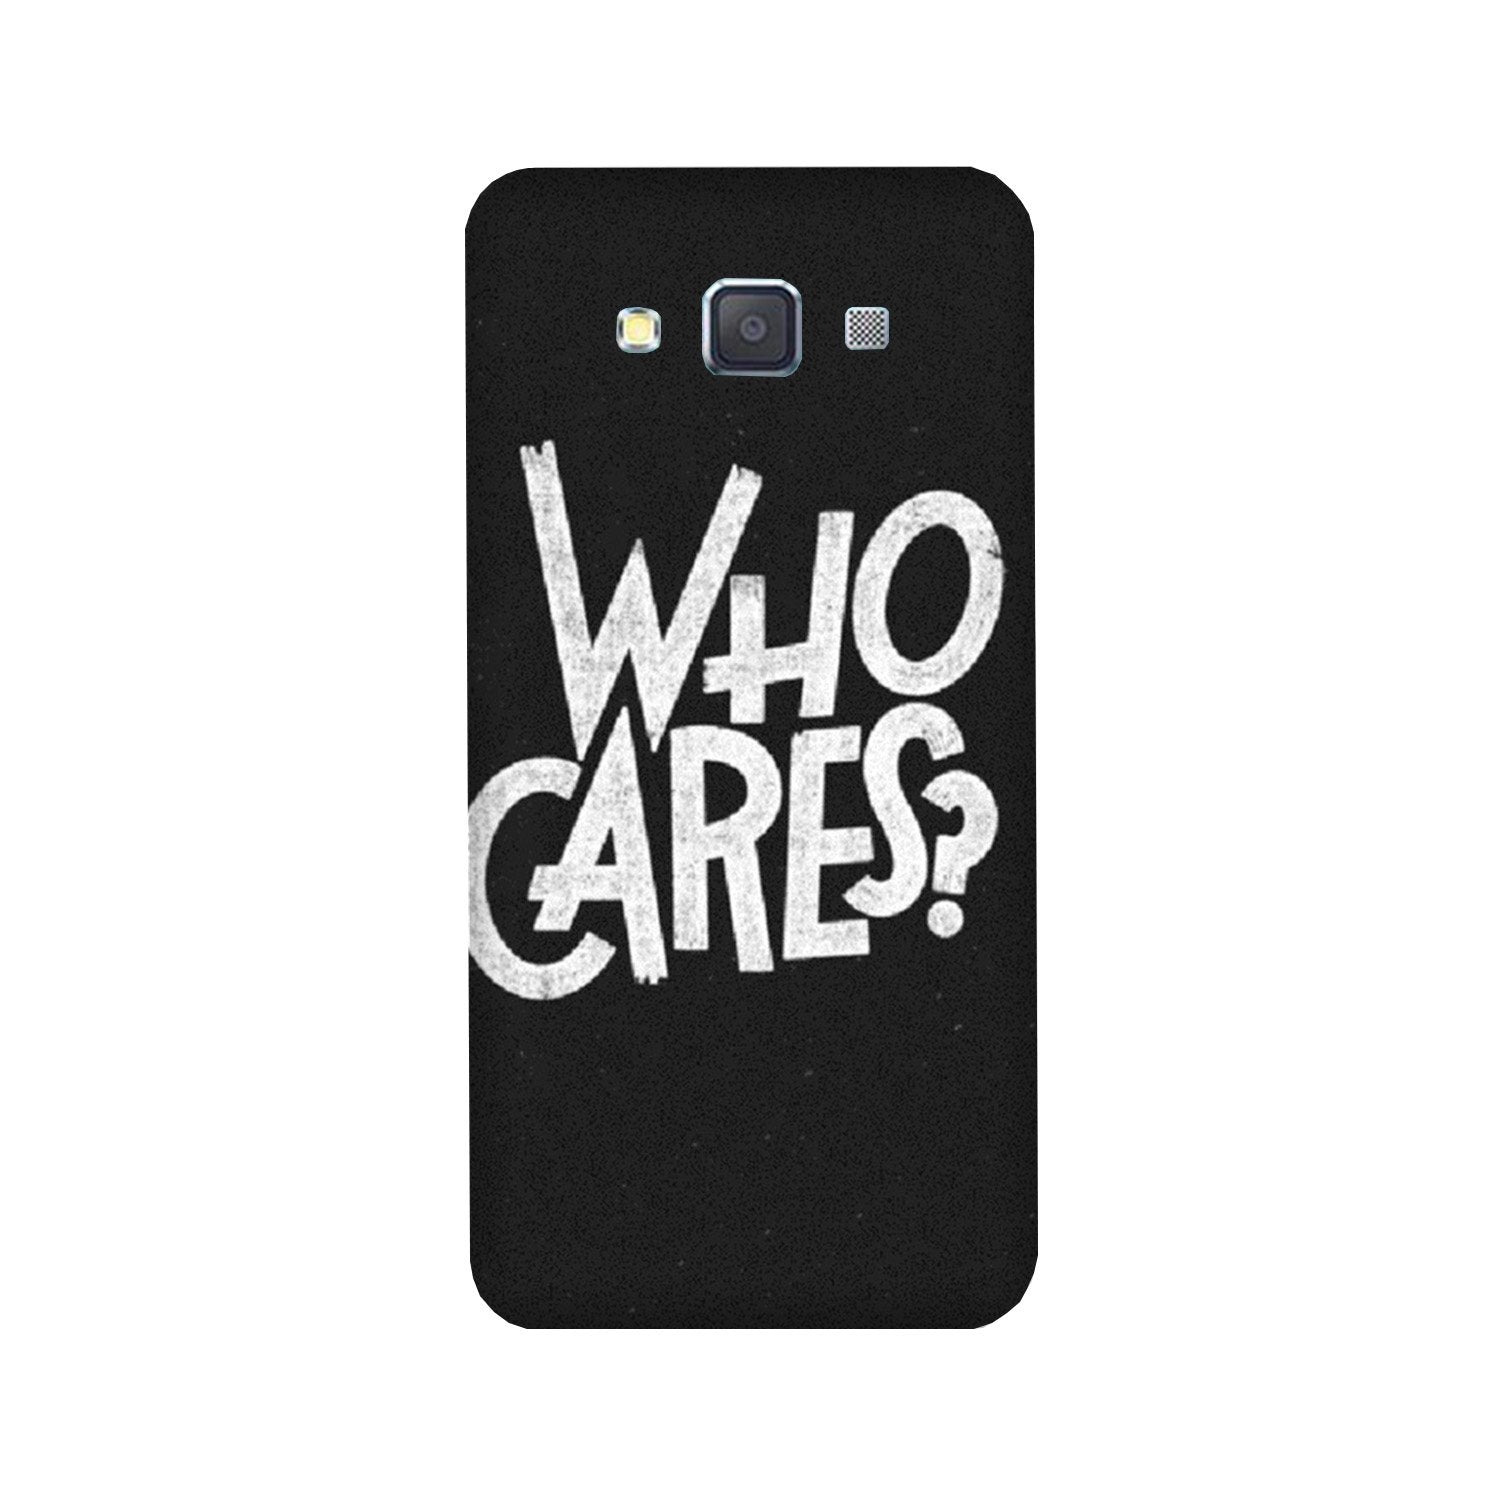 Who Cares Case for Galaxy Grand Prime